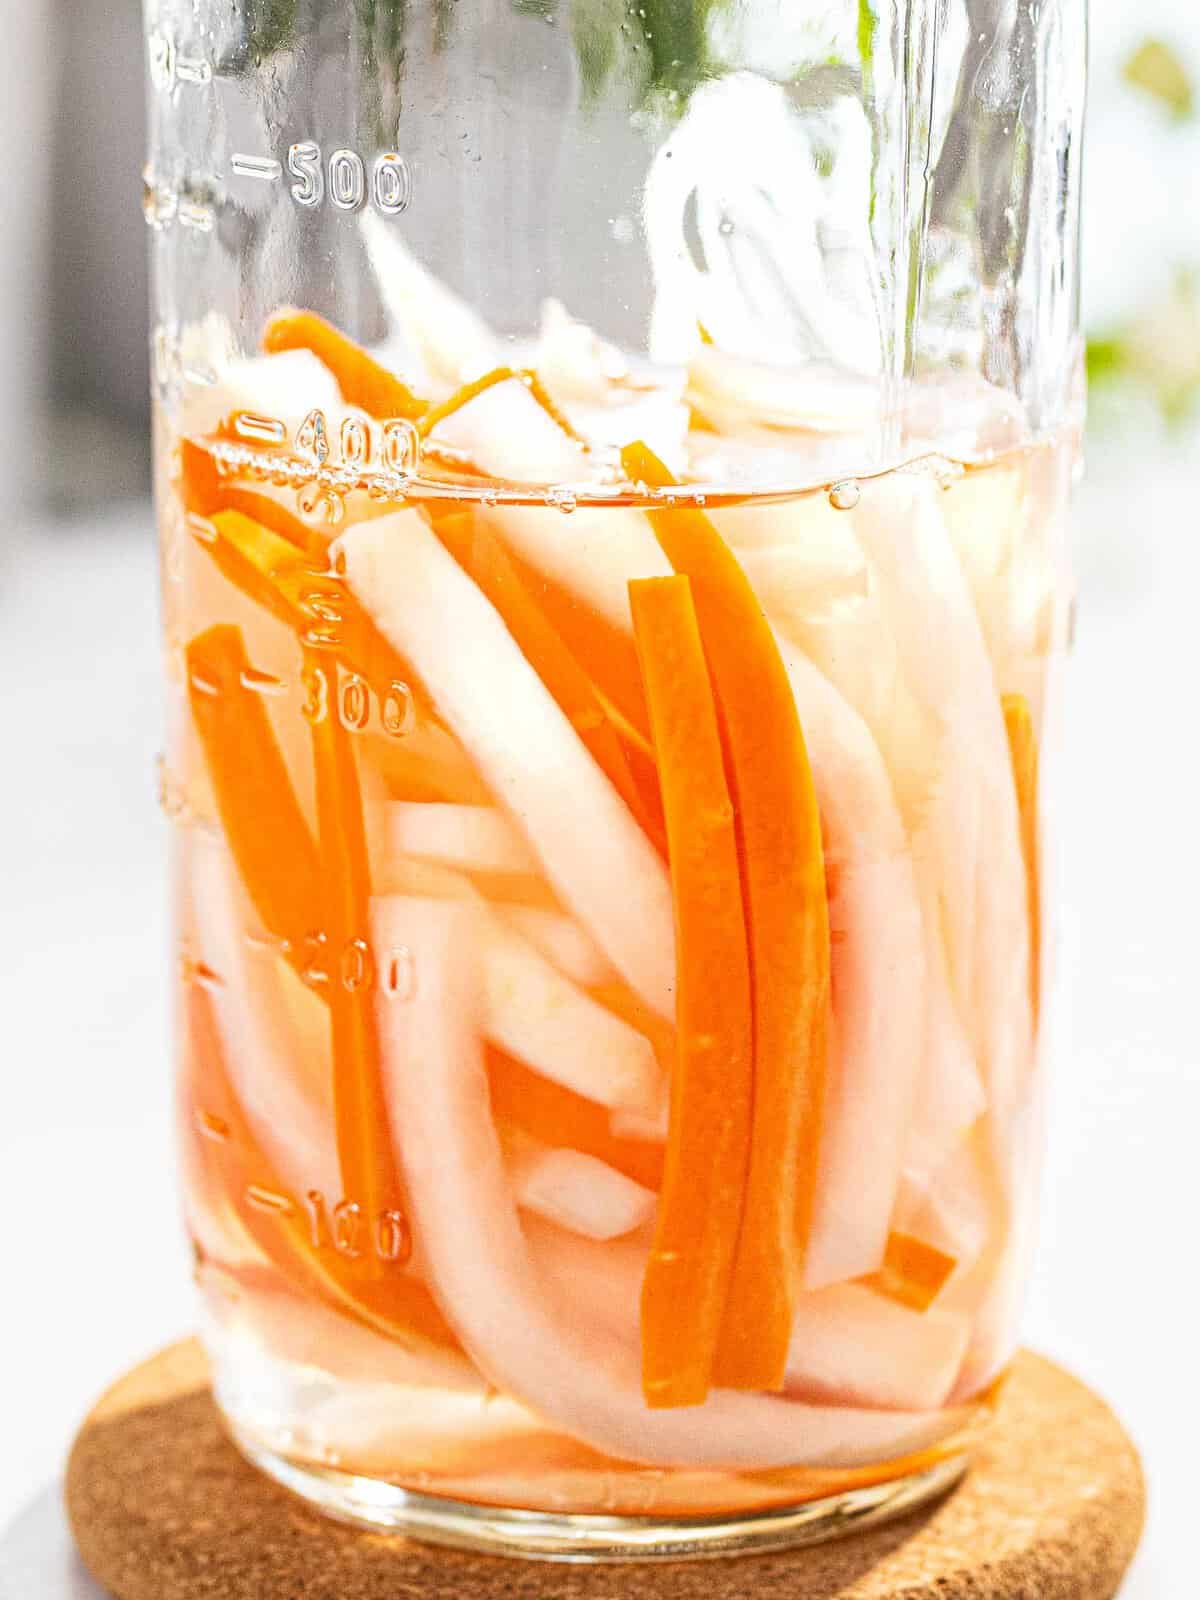 Vietnamese pickled carrots and daikon in a glass jar.